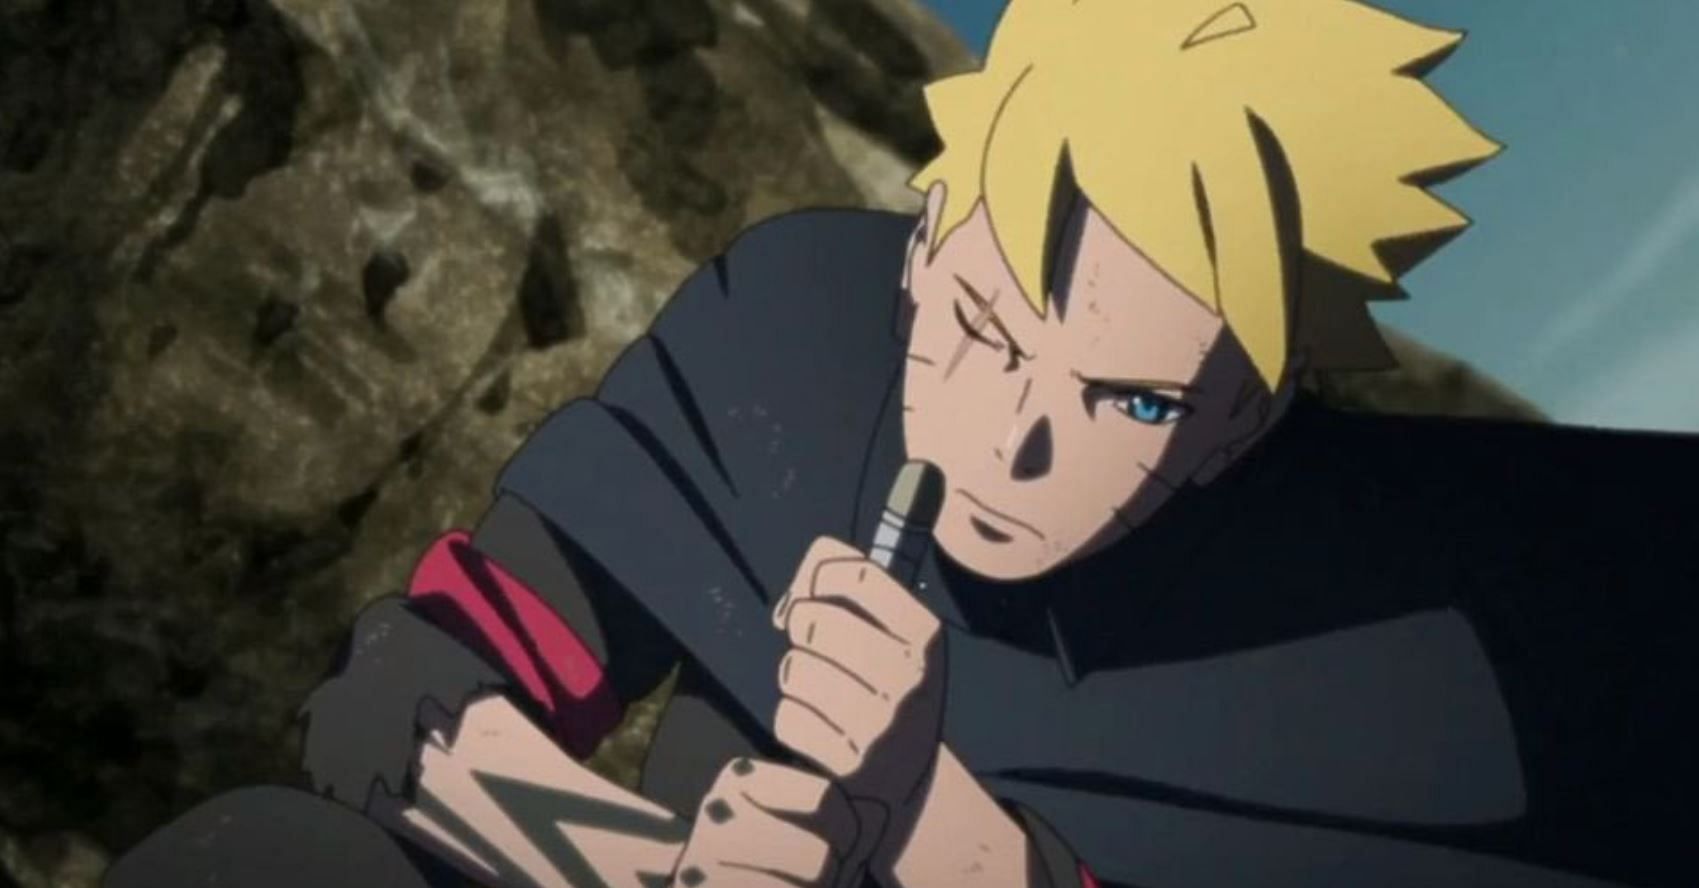 Boruto, we know he has the pure eye. What other eye will he get